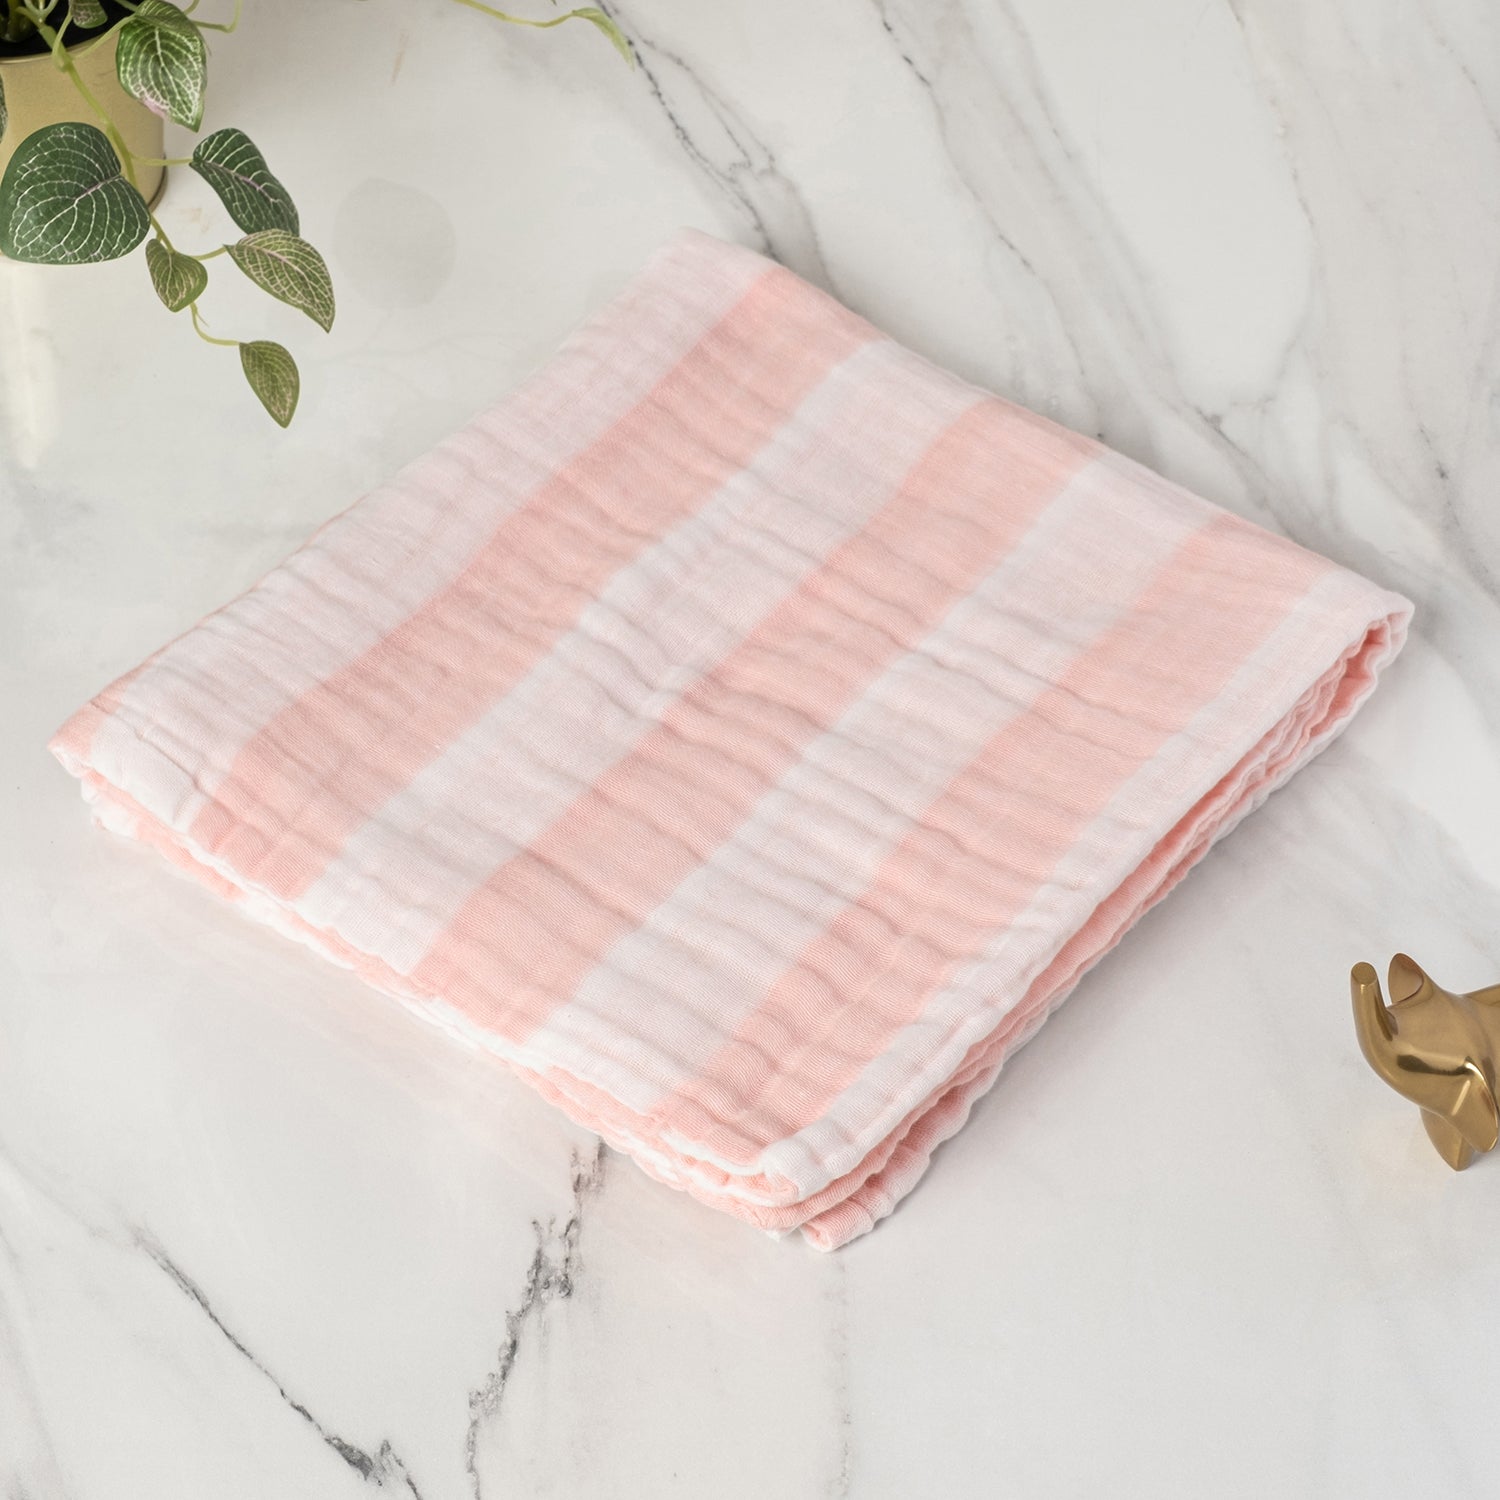 Baby Moo Premium Striped 100% Cotton Ultra Soft Eco Friendly Absorbent Towel - PInk